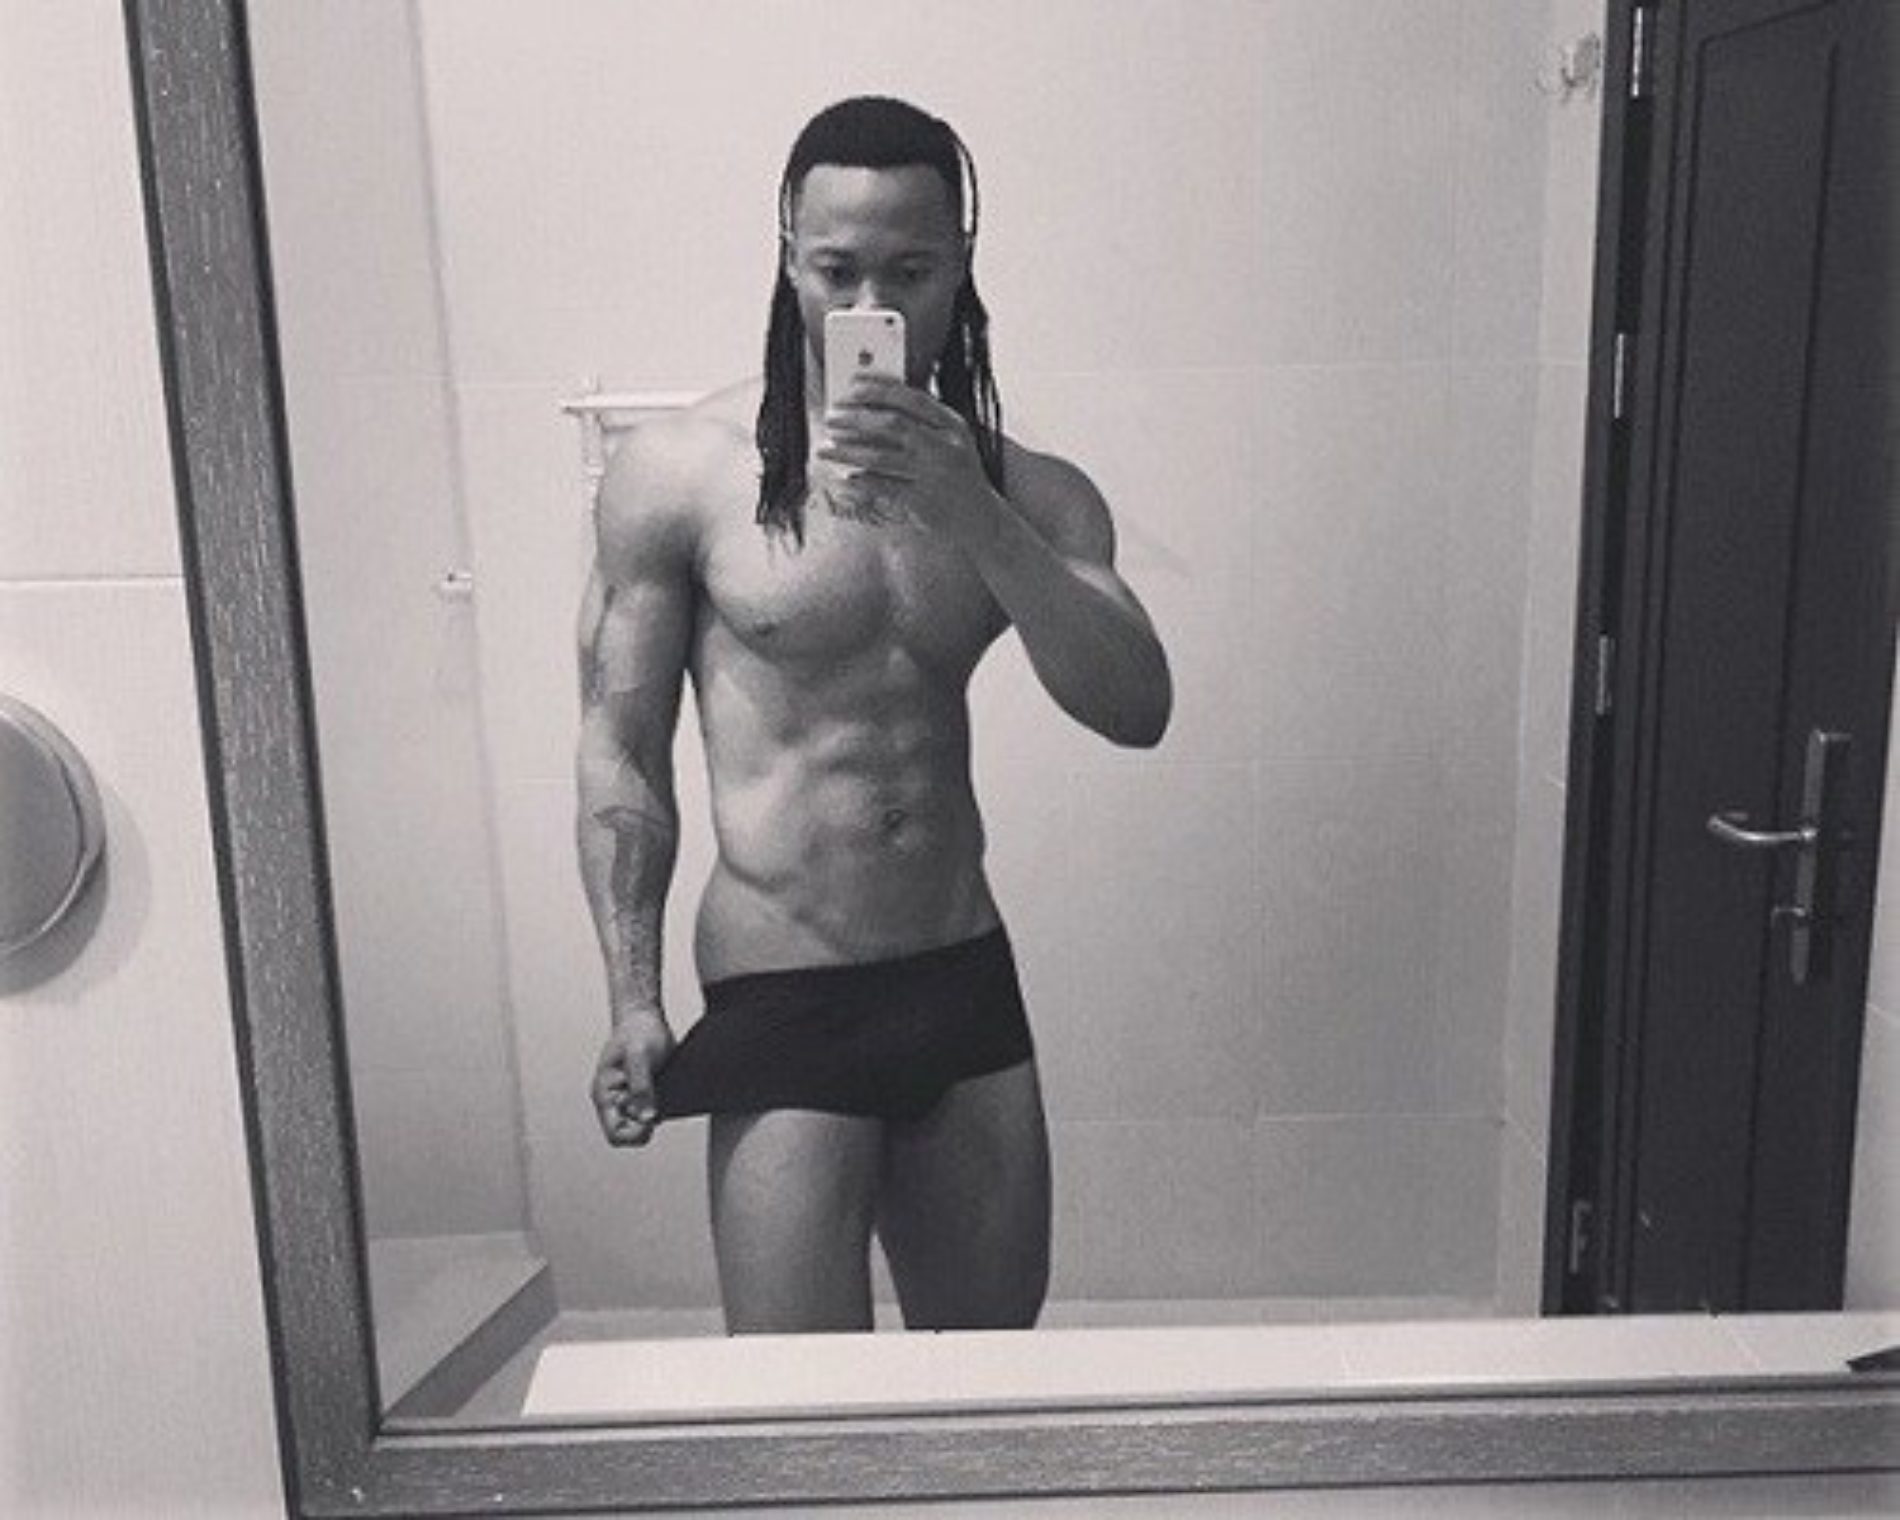 Flavour Responds To Backlash From Half Naked Selfie Of Him Pulling Down His Underwear